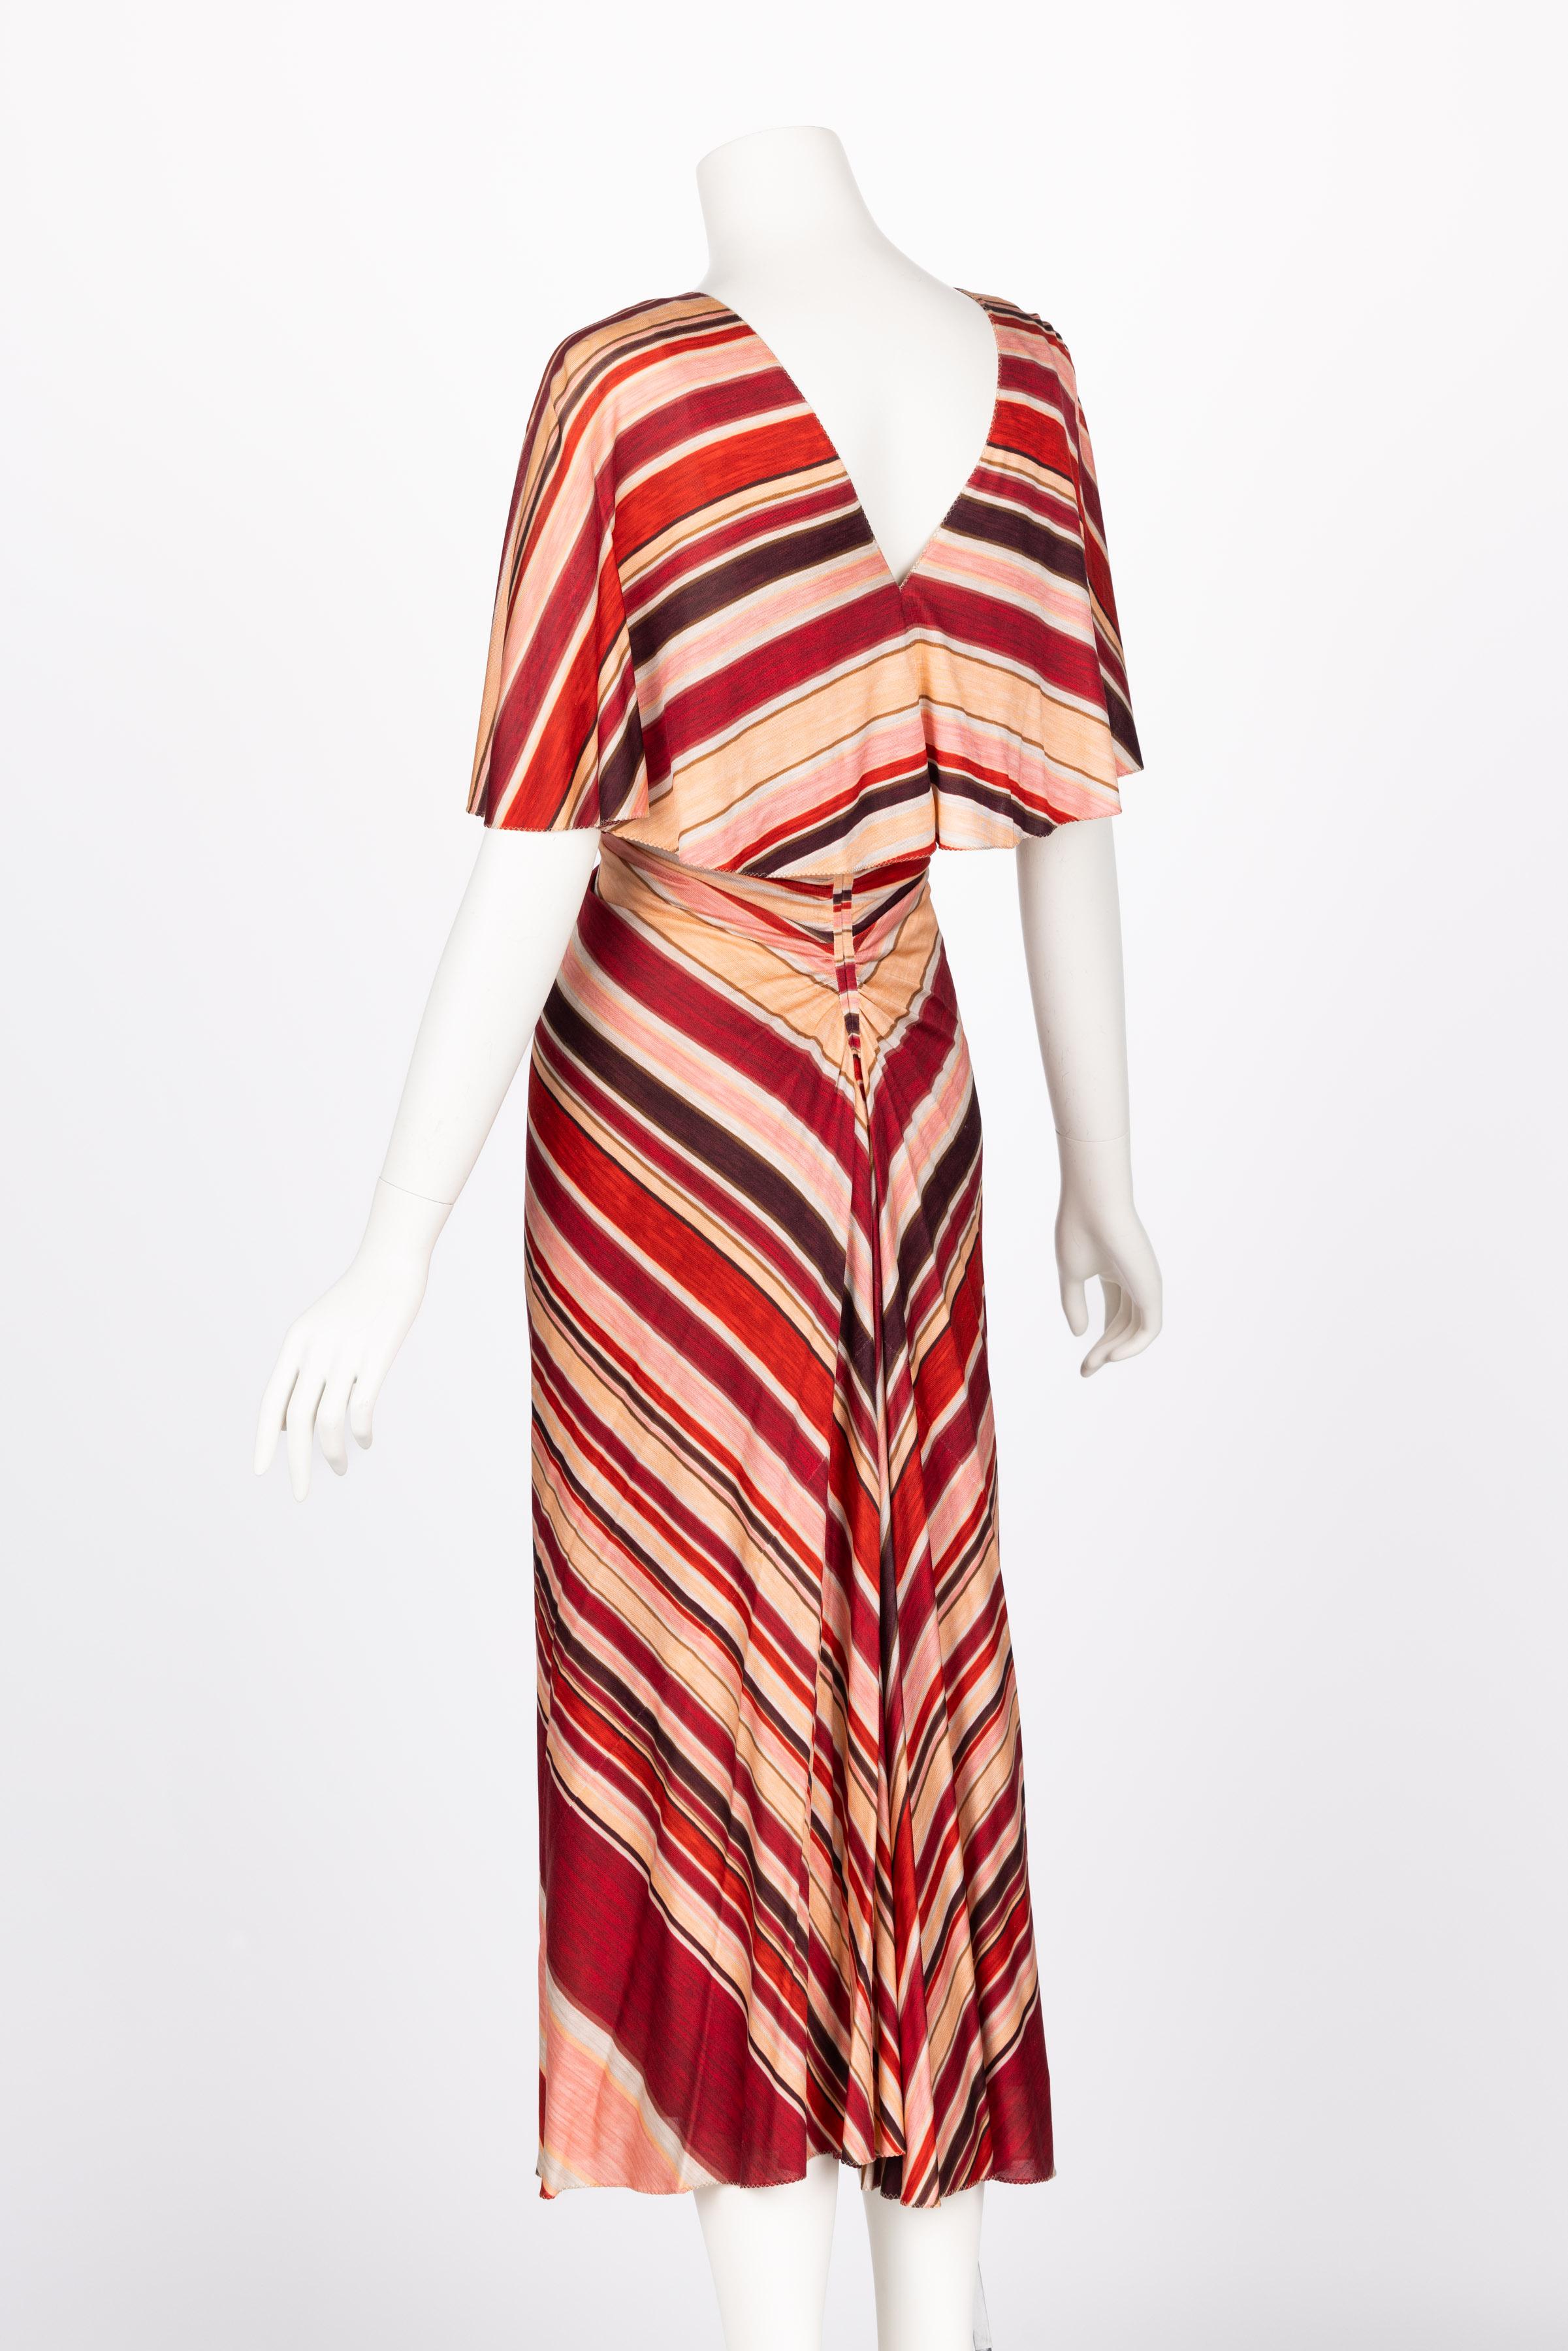 Marc Jacobs Spring 2011 Red & Pink Striped Silk Dress For Sale 2